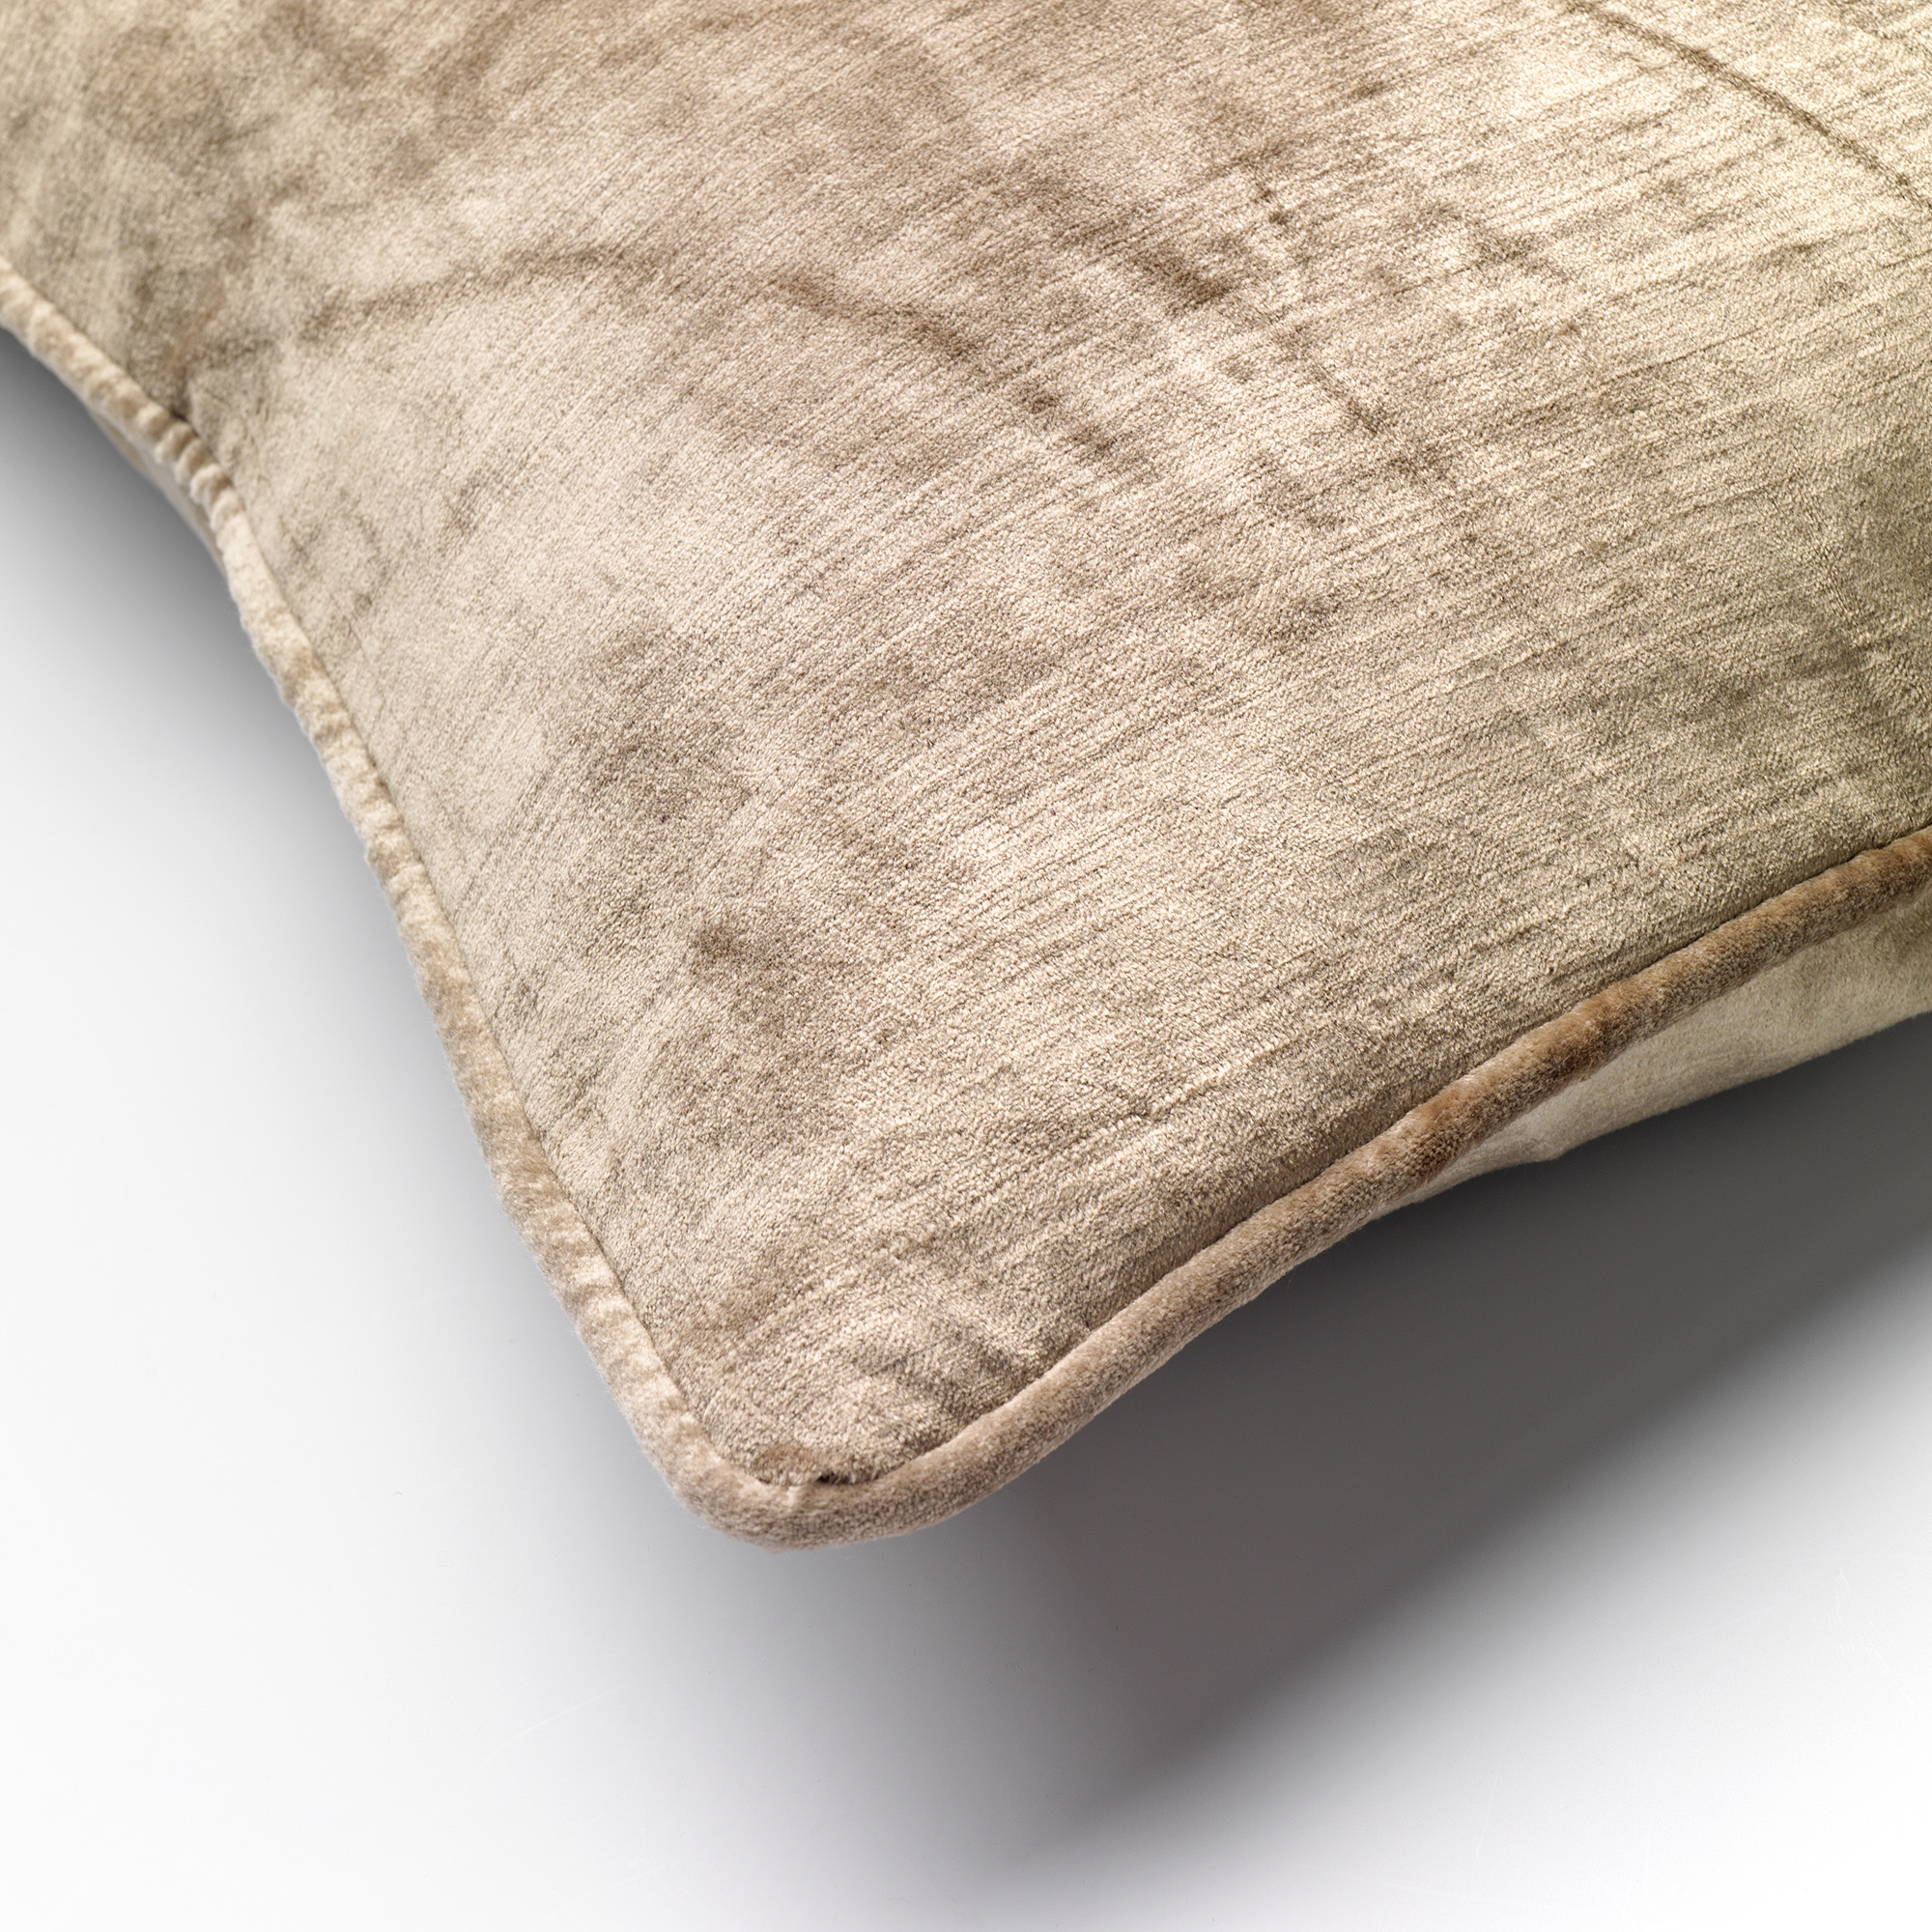 CHLOE | Cushion | 50x50 cm Pumice Stone | Beige | Hoii | with GRS feather filling